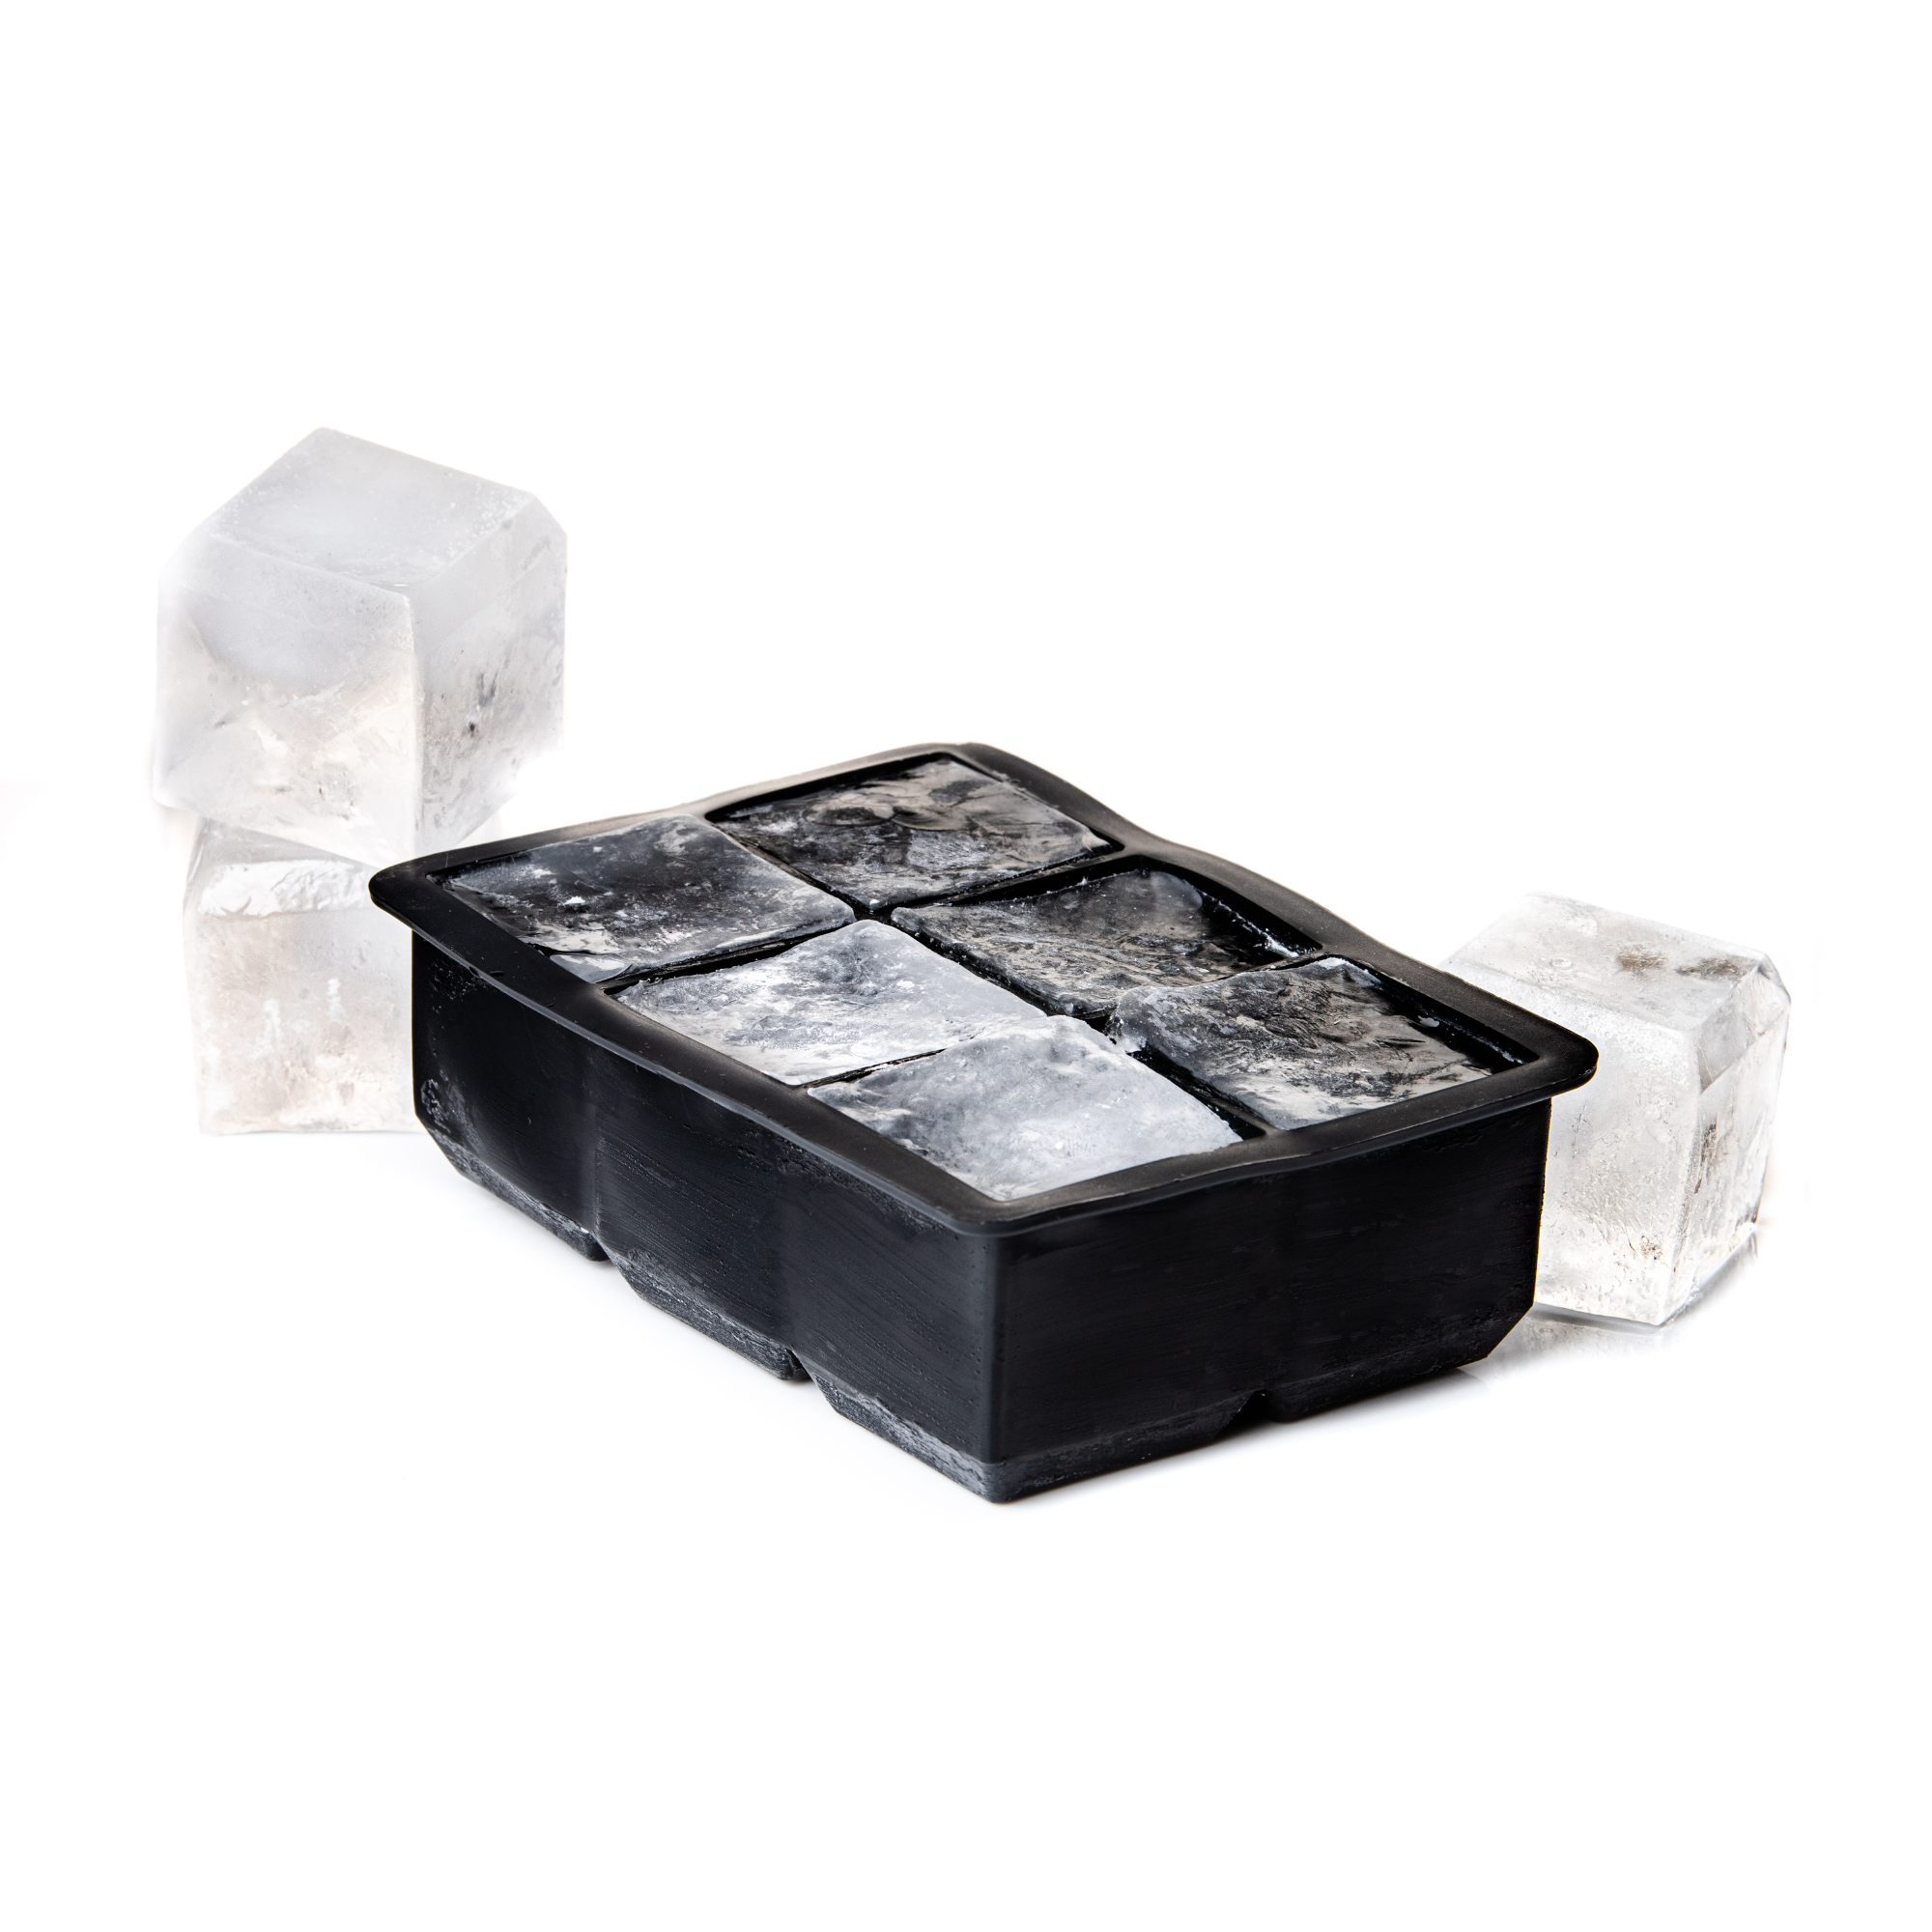 BarProducts.com King Cube Silicone Ice Tray - Black